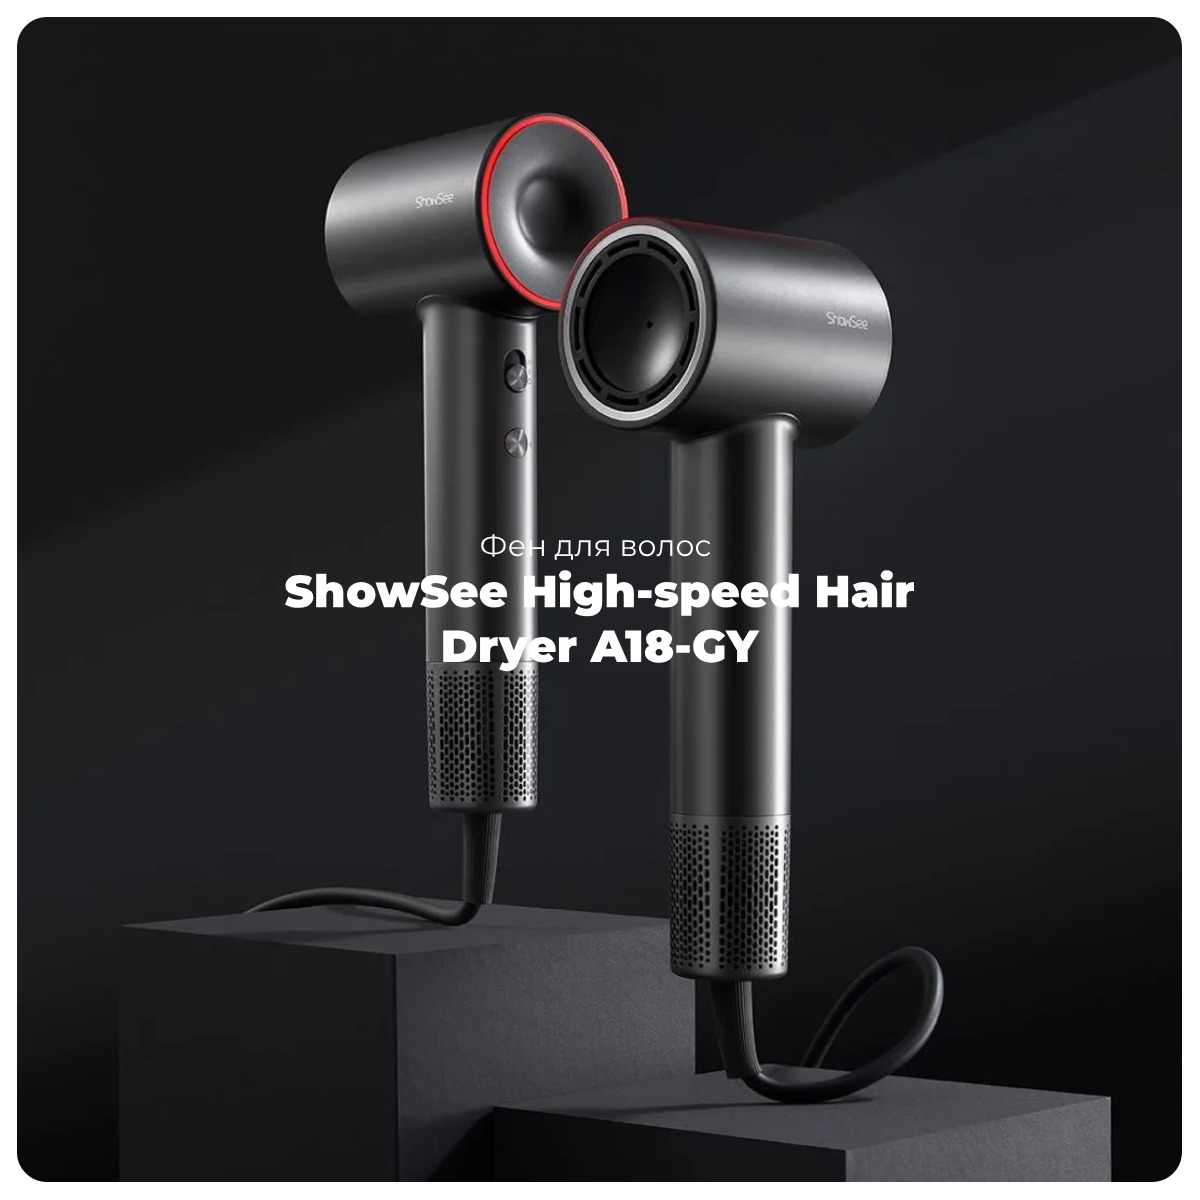 ShowSee-High-speed-Hair-Dryer-A18-GY-01